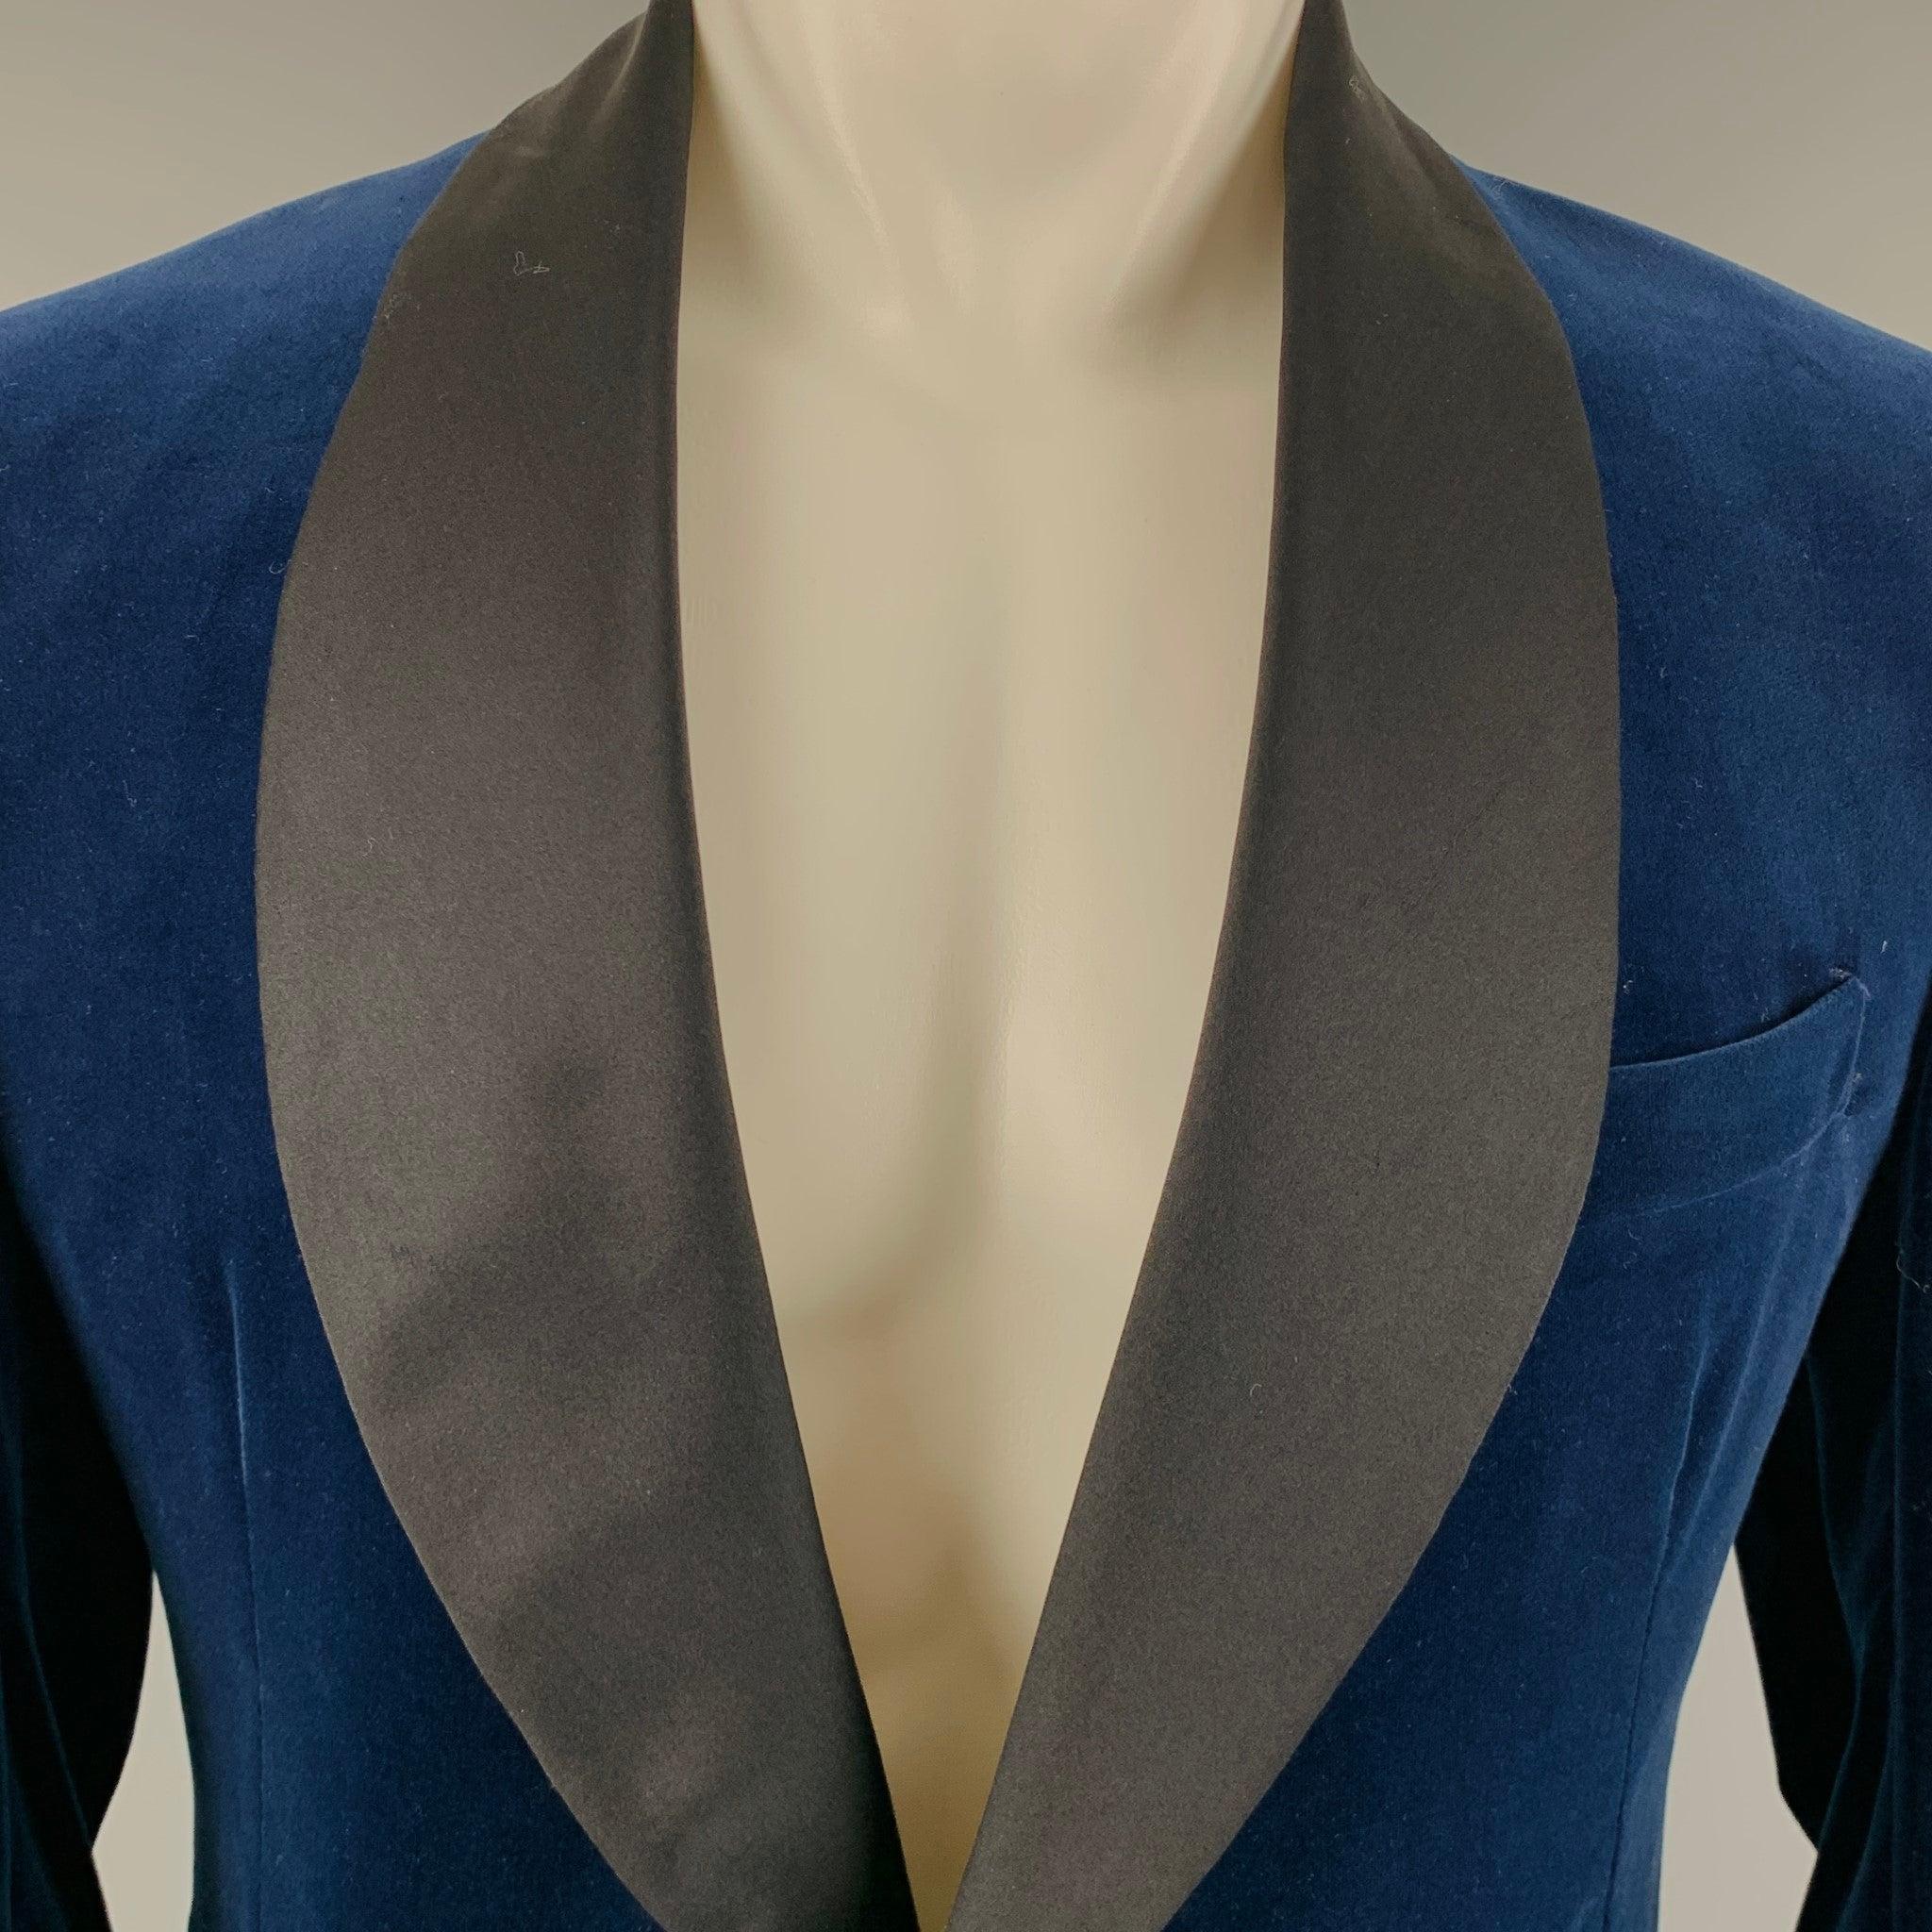 Vintage1968 DUNHILL sport coat
in a blue velvet fabric featuring shawl collar, ventless back, and single button closure.Very Good Pre-Owned Condition. Minor signs of wear on collar. 

Marked:   SP06466 

Measurements: 
 
Shoulder: 18 inches Chest: